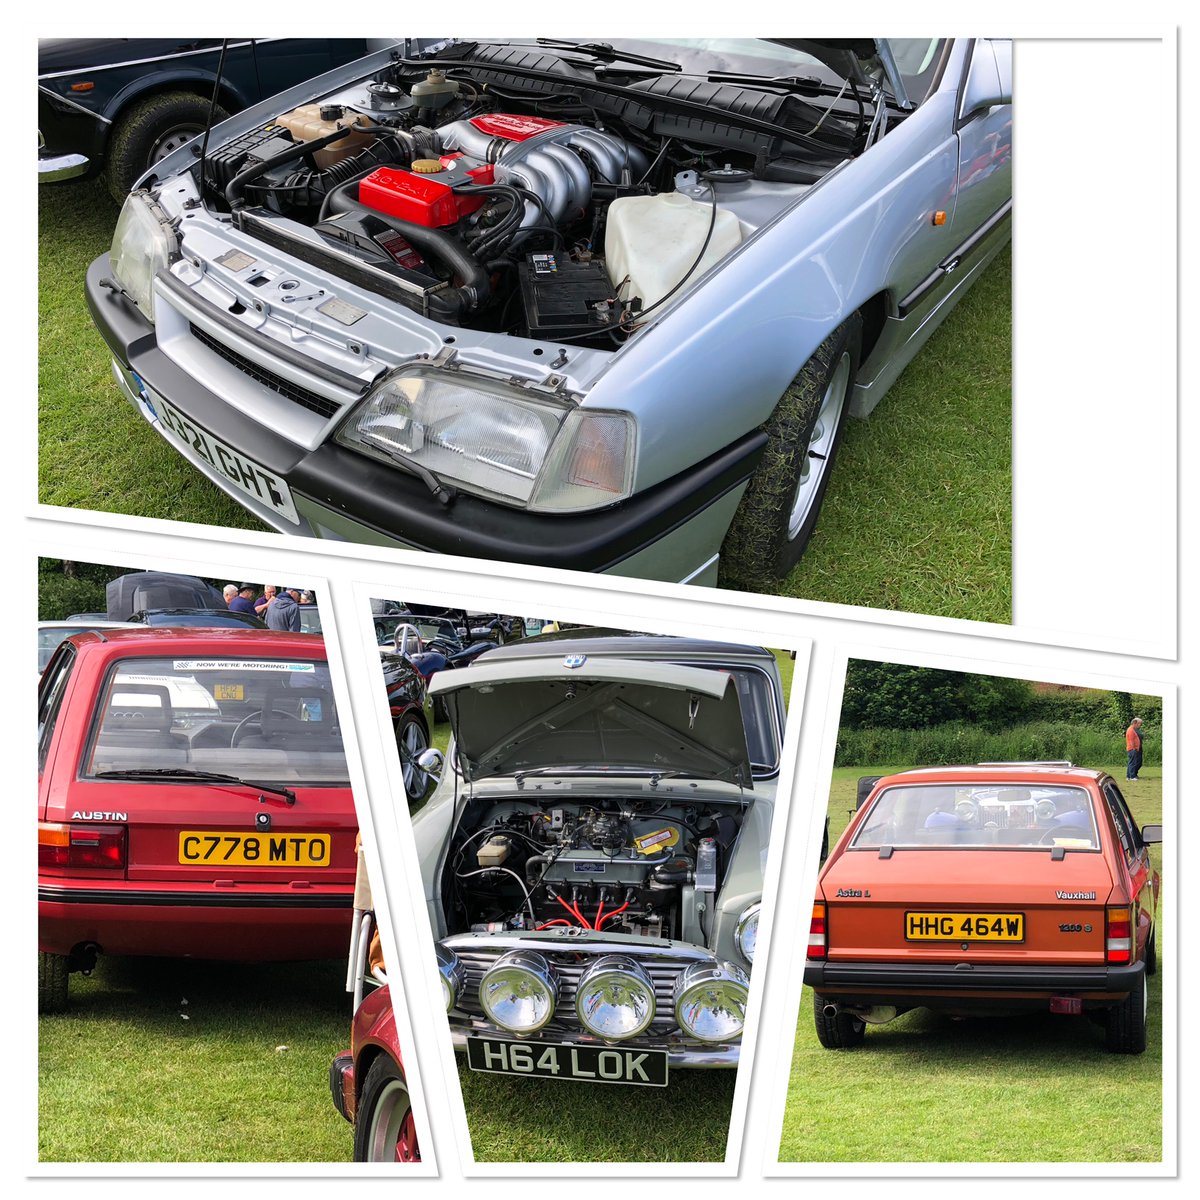 I've seen the Meastro and early Mk1 Astra saloon at previous shows here before (always good to see them). Several engines on display today. The Carlton GSi was fabulous.